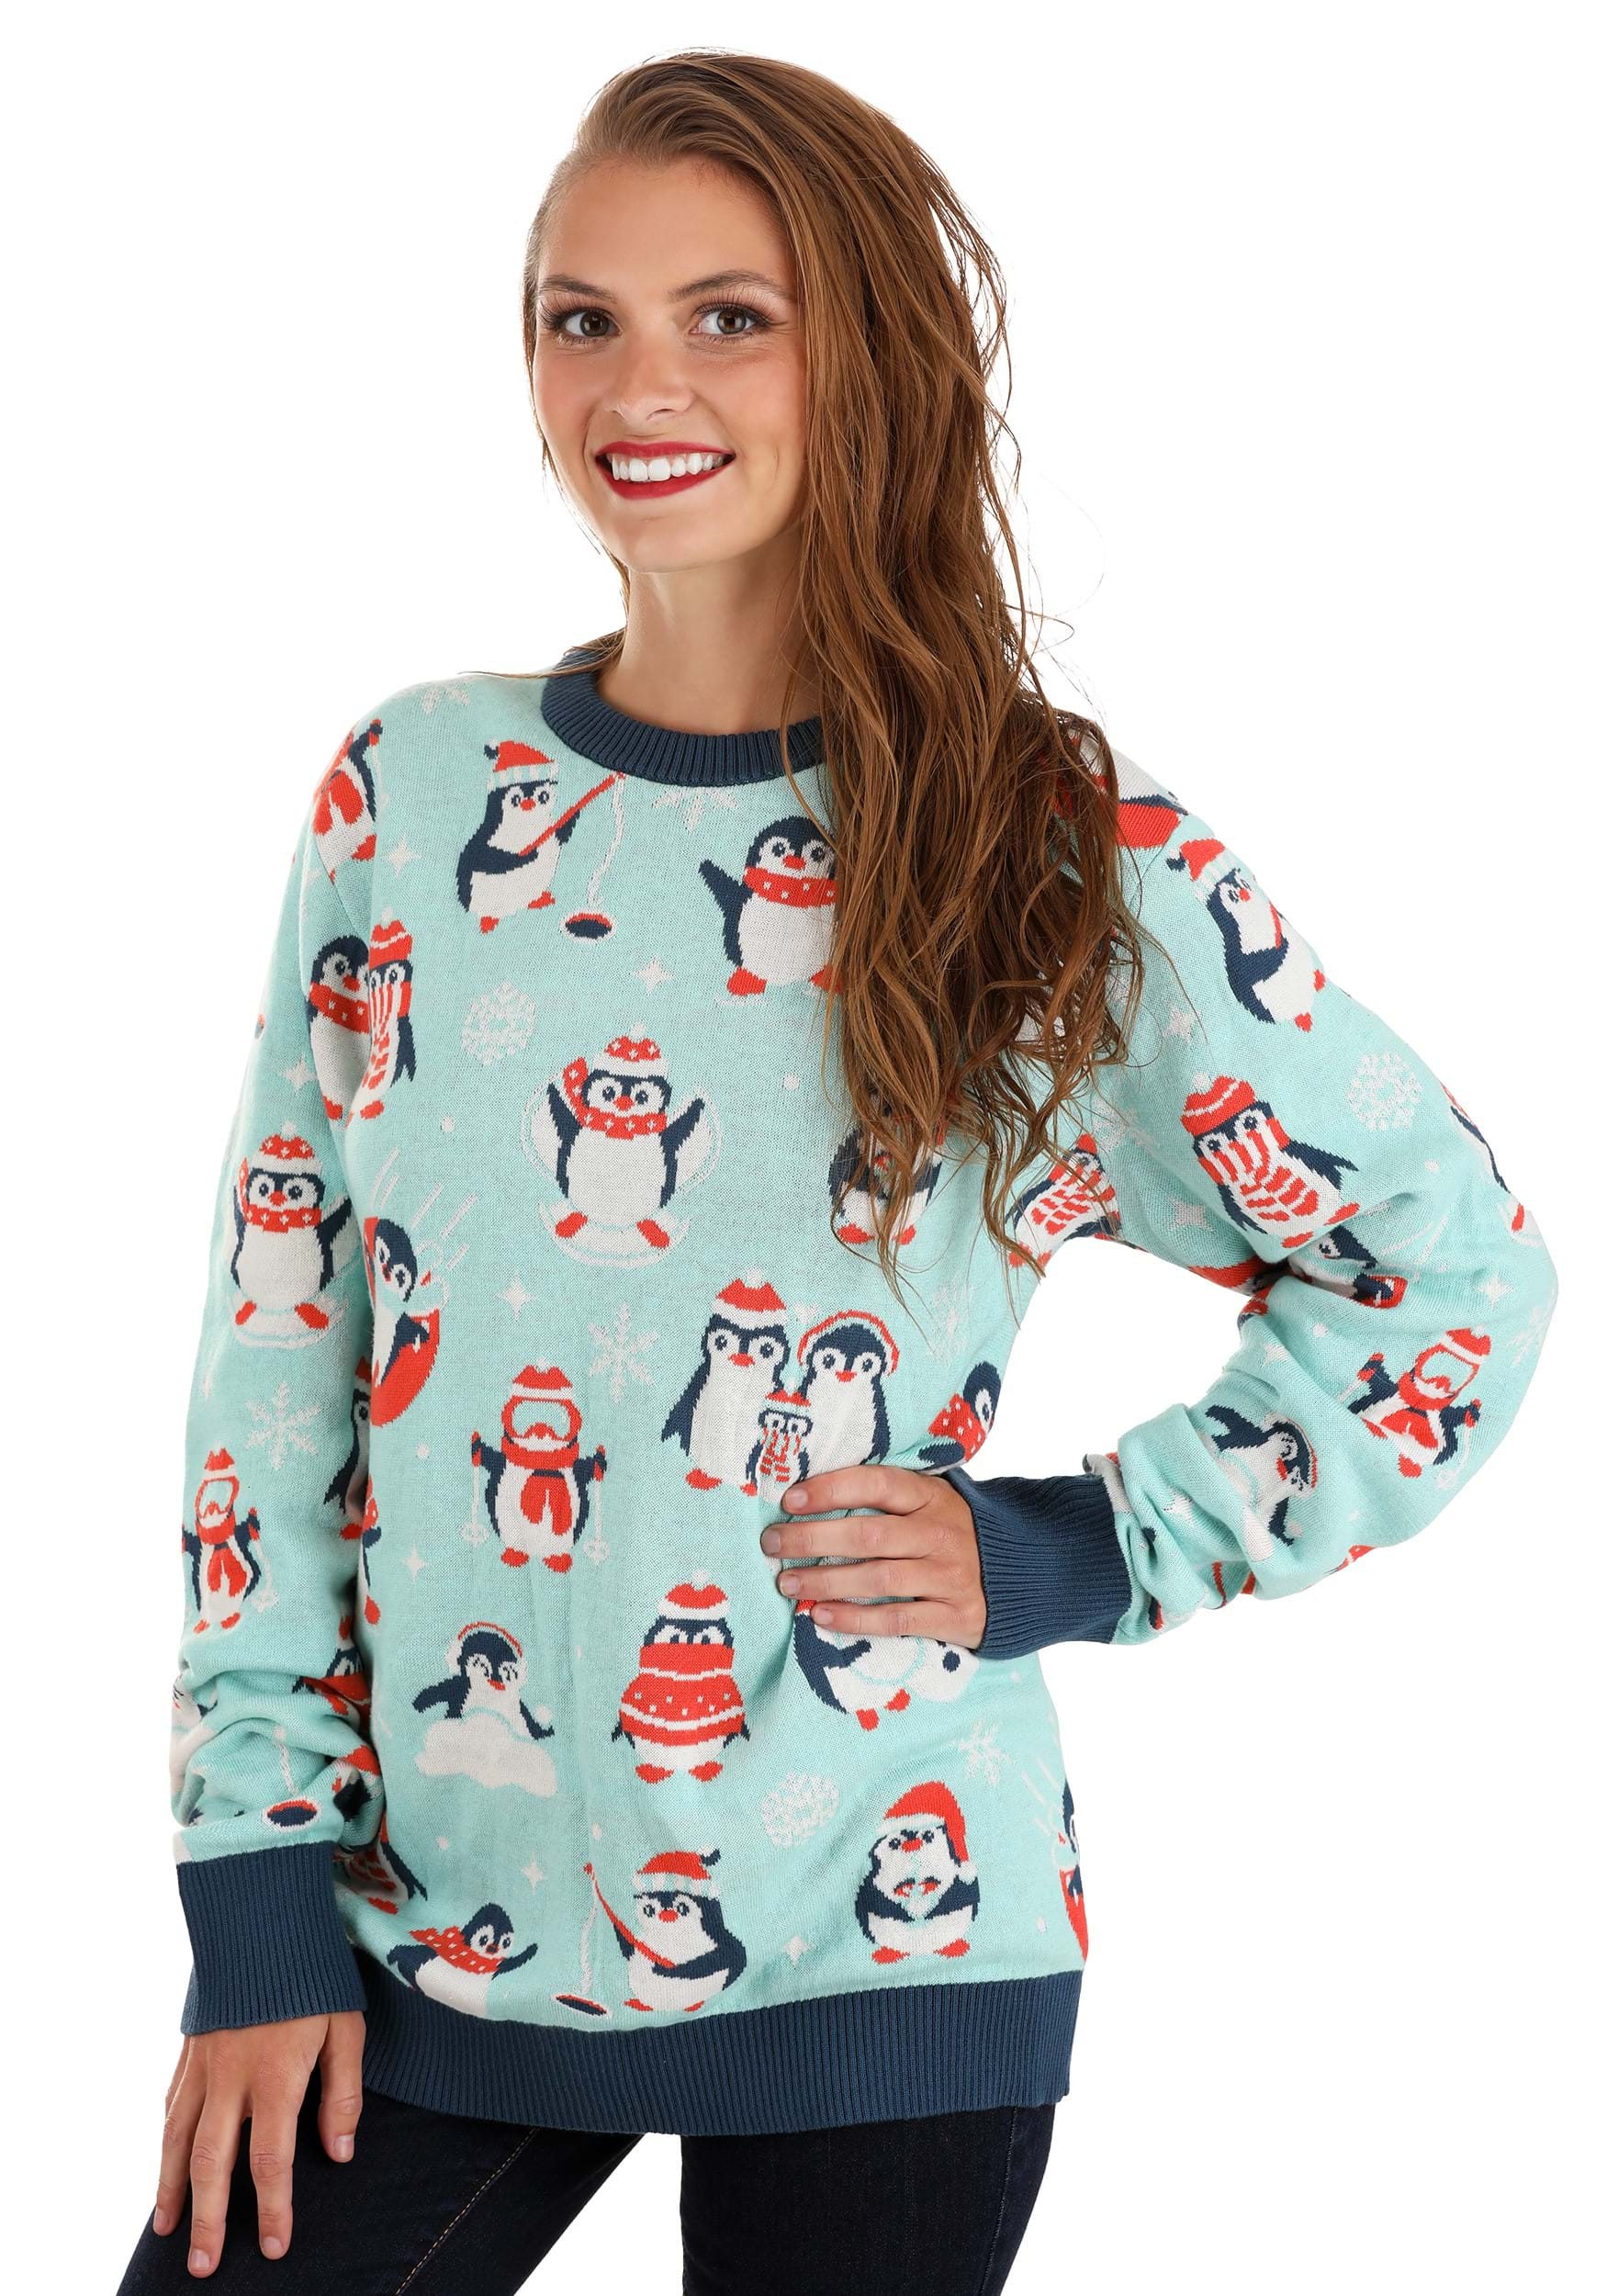 Stay Cool Penguin Ugly Christmas Sweater TWS by Vinco XL